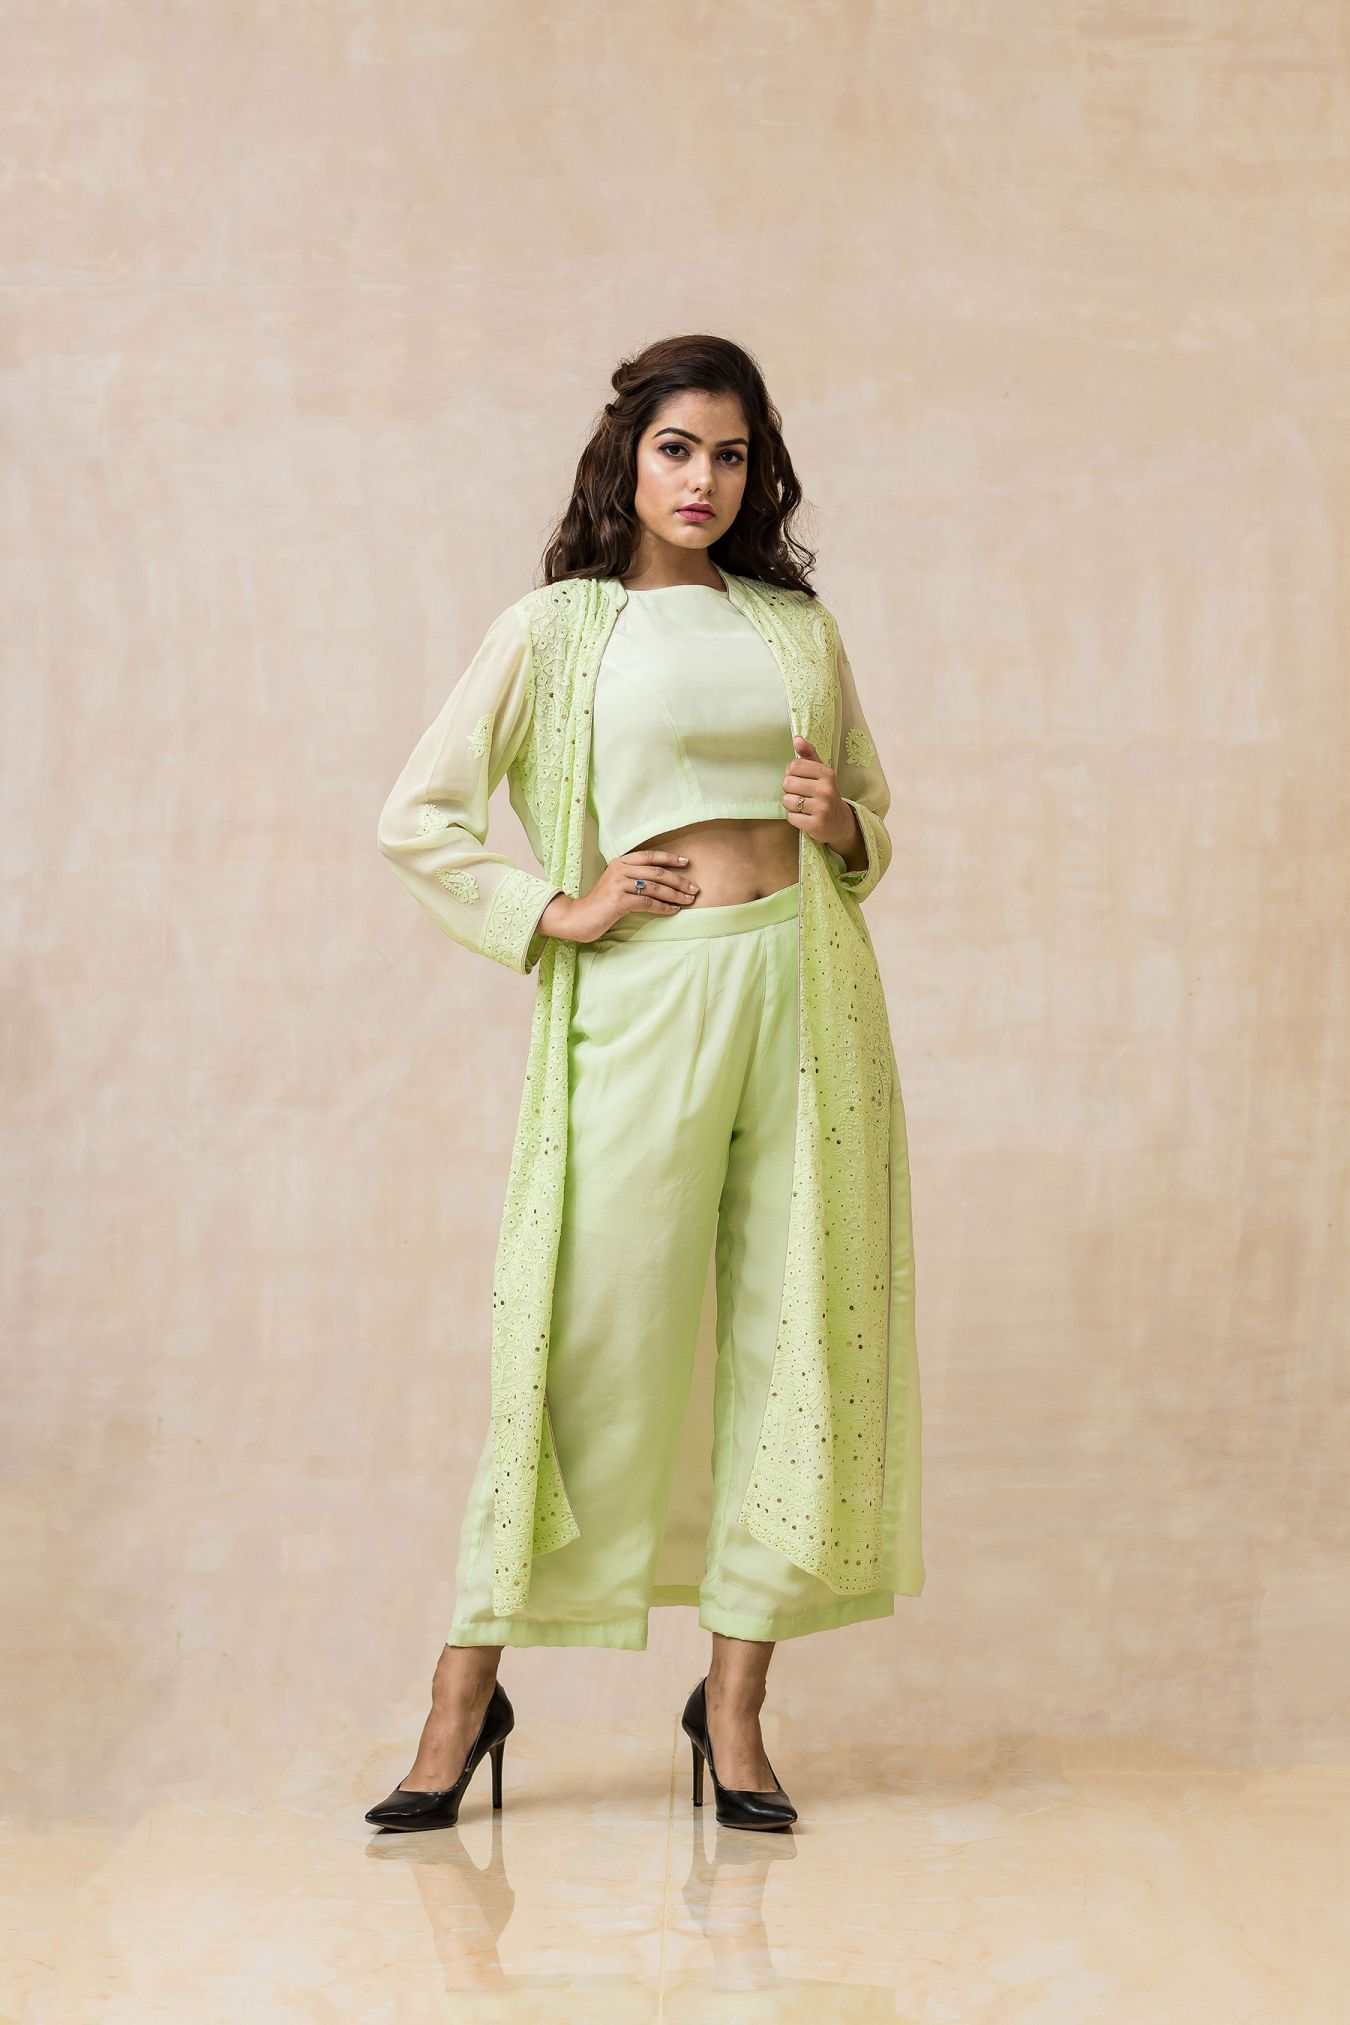 Schmick Handcrafted Chikankari Jacket Paired with Crop Top & Palazzo in Fresh Hue of Pista Green Color.